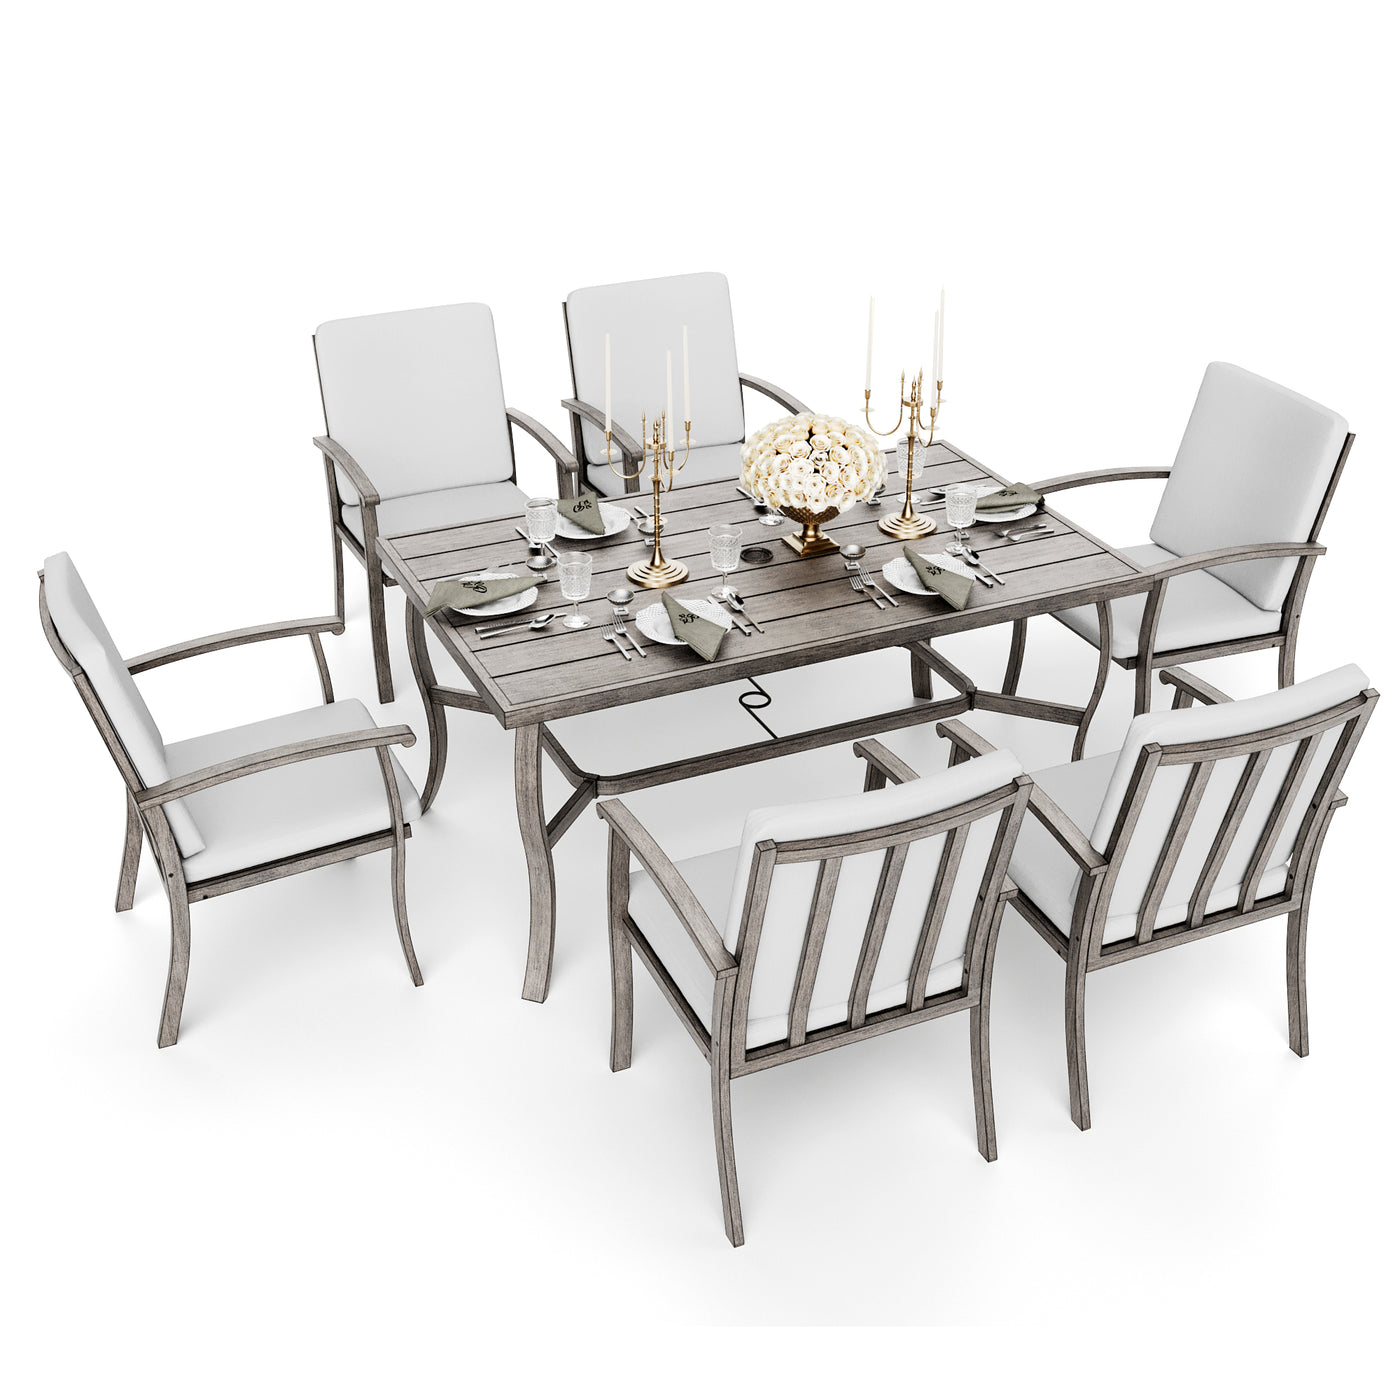 HAPPATIO 7 Piece Patio Dining Set, Aluminum Outdoor Dining Set, Aluminum Dining Table and Chairs Set, Patio Dining Furniture with Aluminum Table, Chairs and Washable Cushions